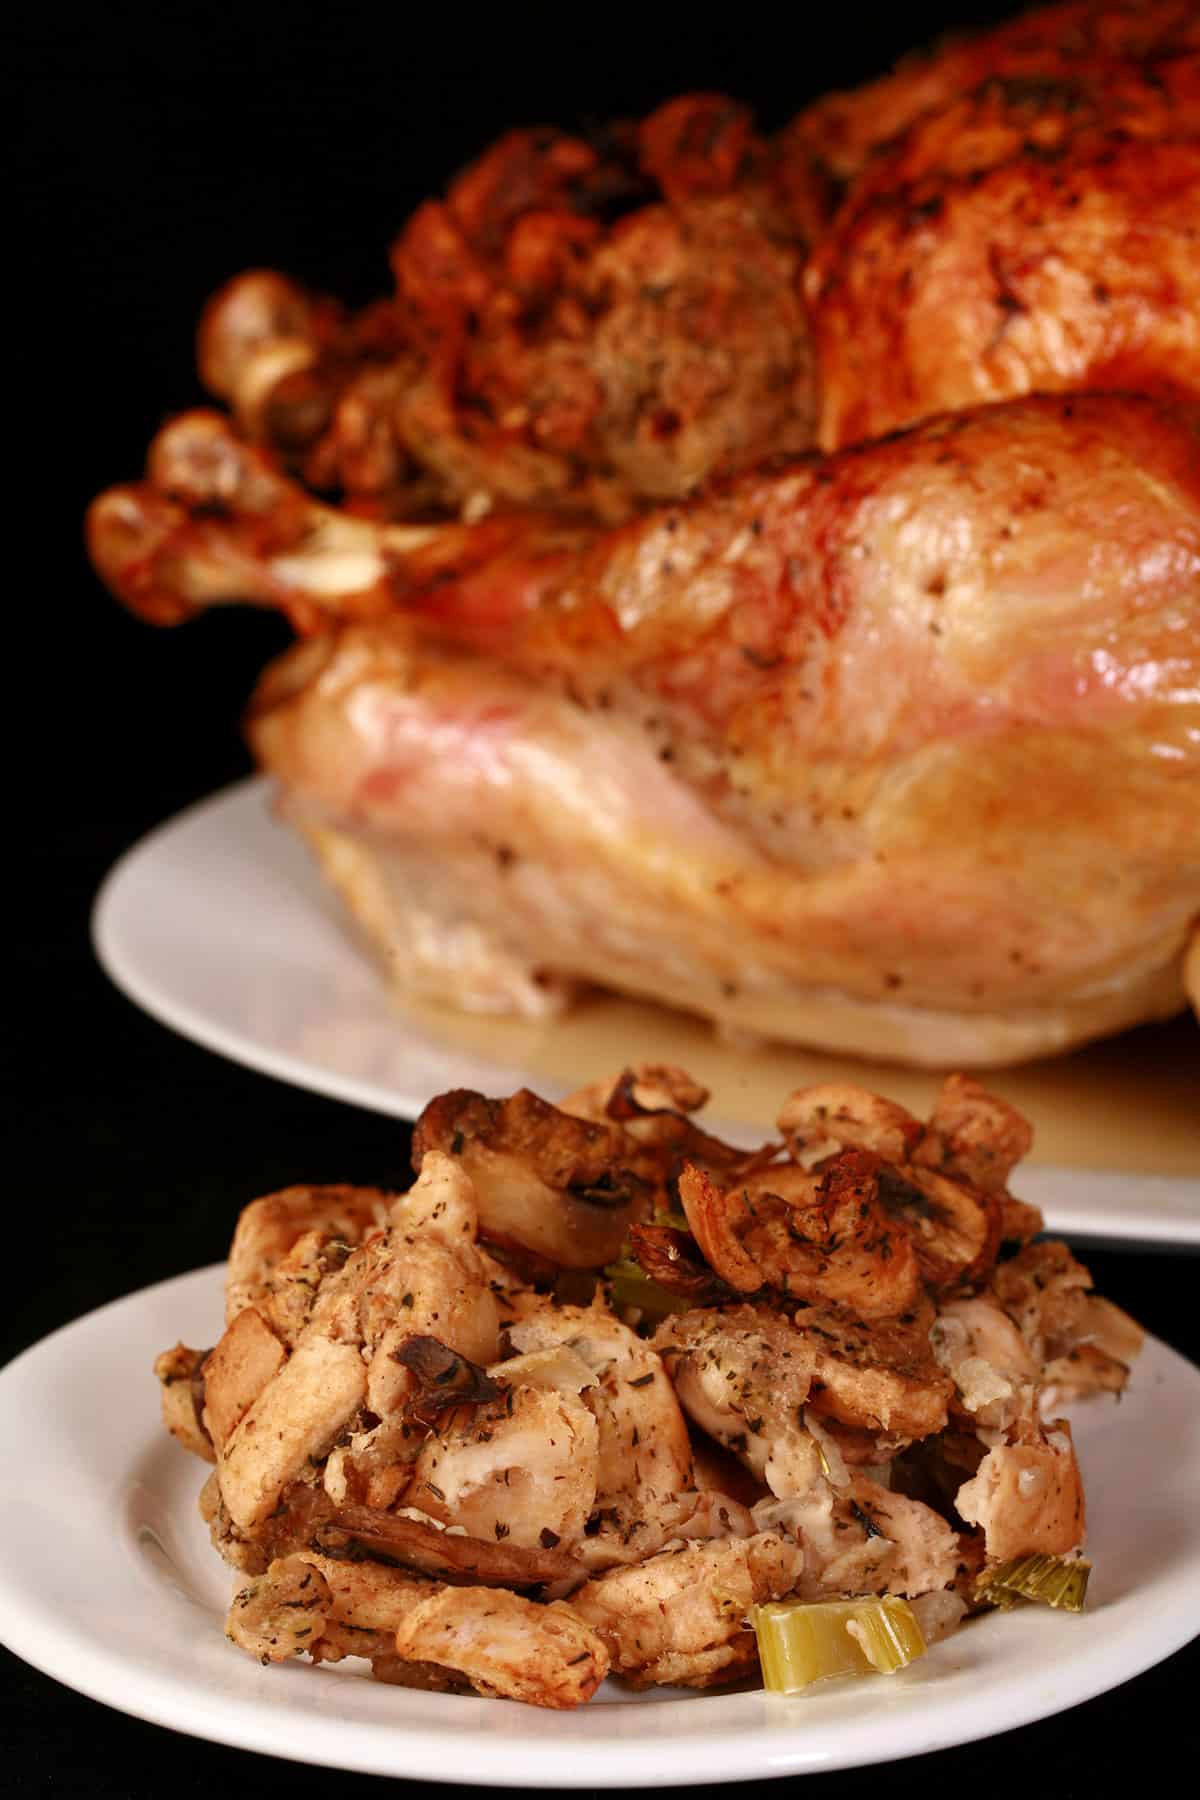 A plate of keto turkey stuffing in front of a roasted turkey.